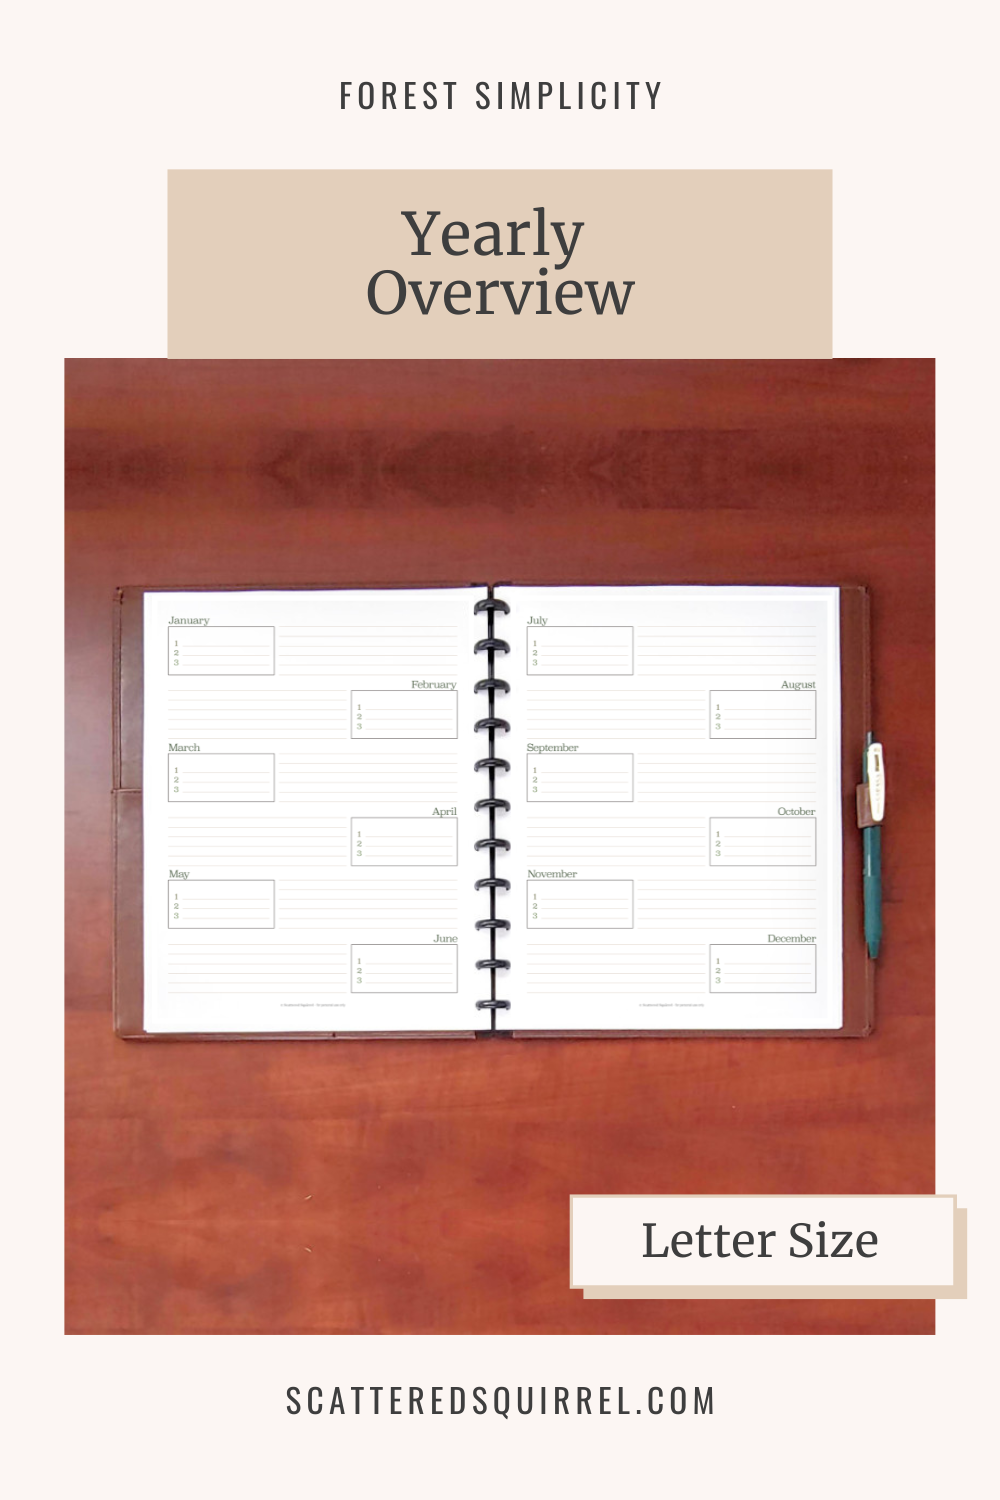 Image says "Forest Simplicity - Yearly Overview" at the top. Underneath is a picture of a brown leather planner lying open on a wooden desk. The pages are each divided into six sections, each one labeled with a month to allow for planning or notes for the whole year. This image links to the Letter Size Yearly Overview PDF that can be downloaded.